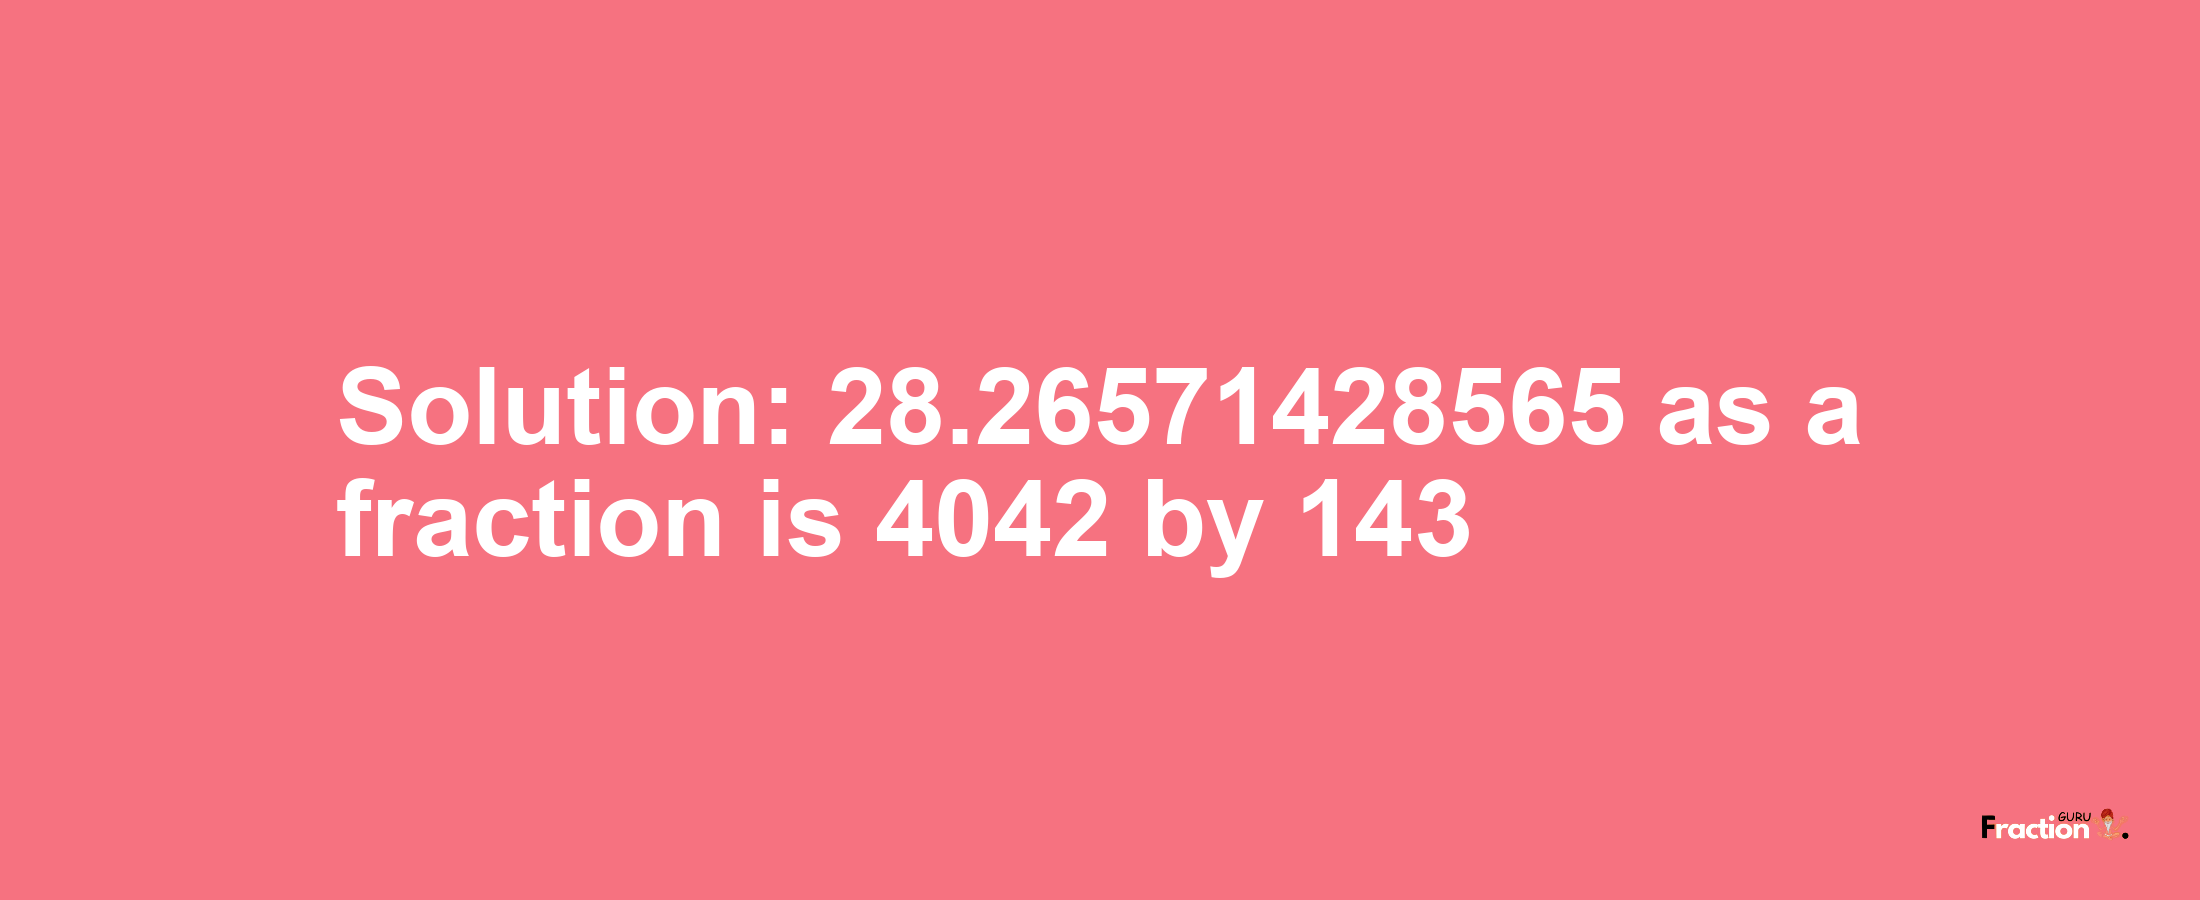 Solution:28.26571428565 as a fraction is 4042/143